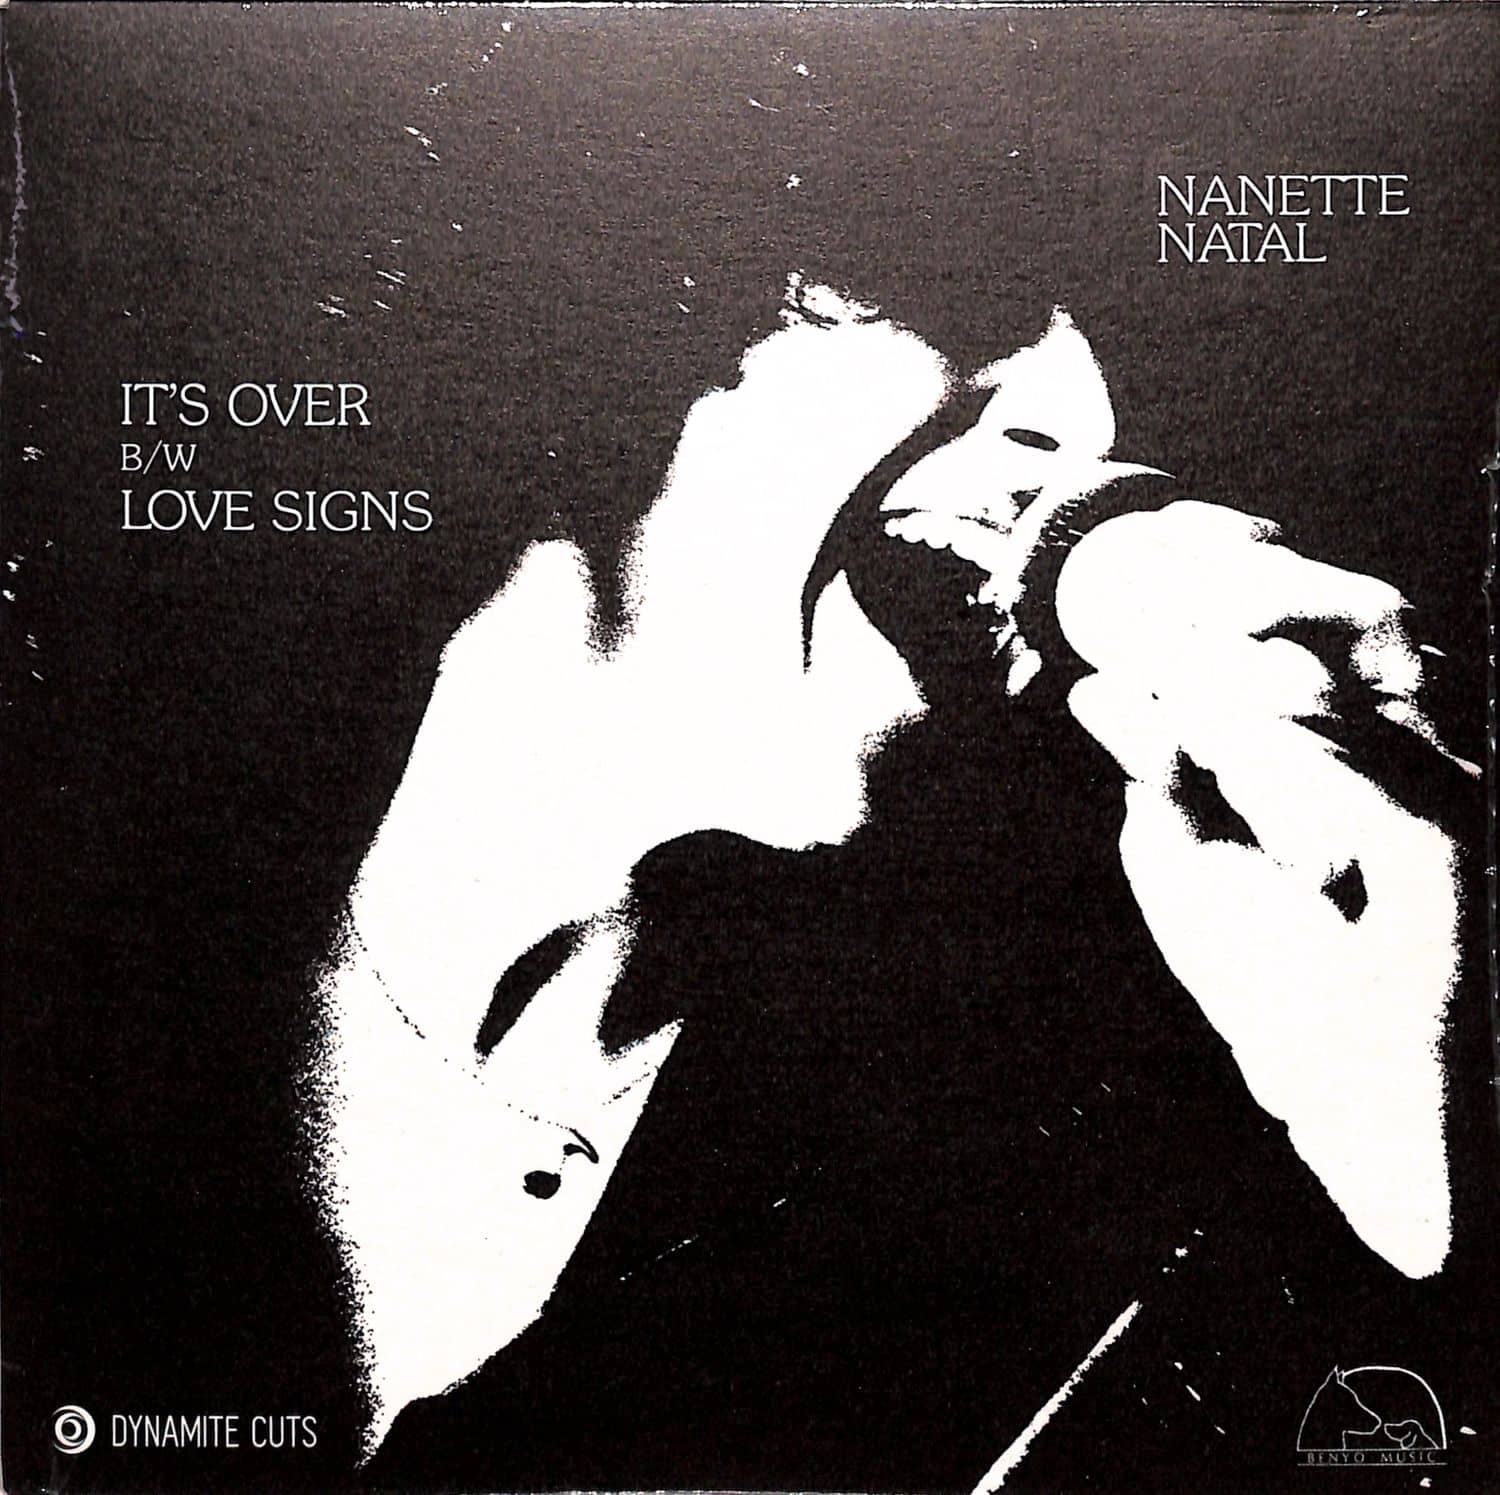 Nanette Natal - ITS OVER / LOVE SIGNS 